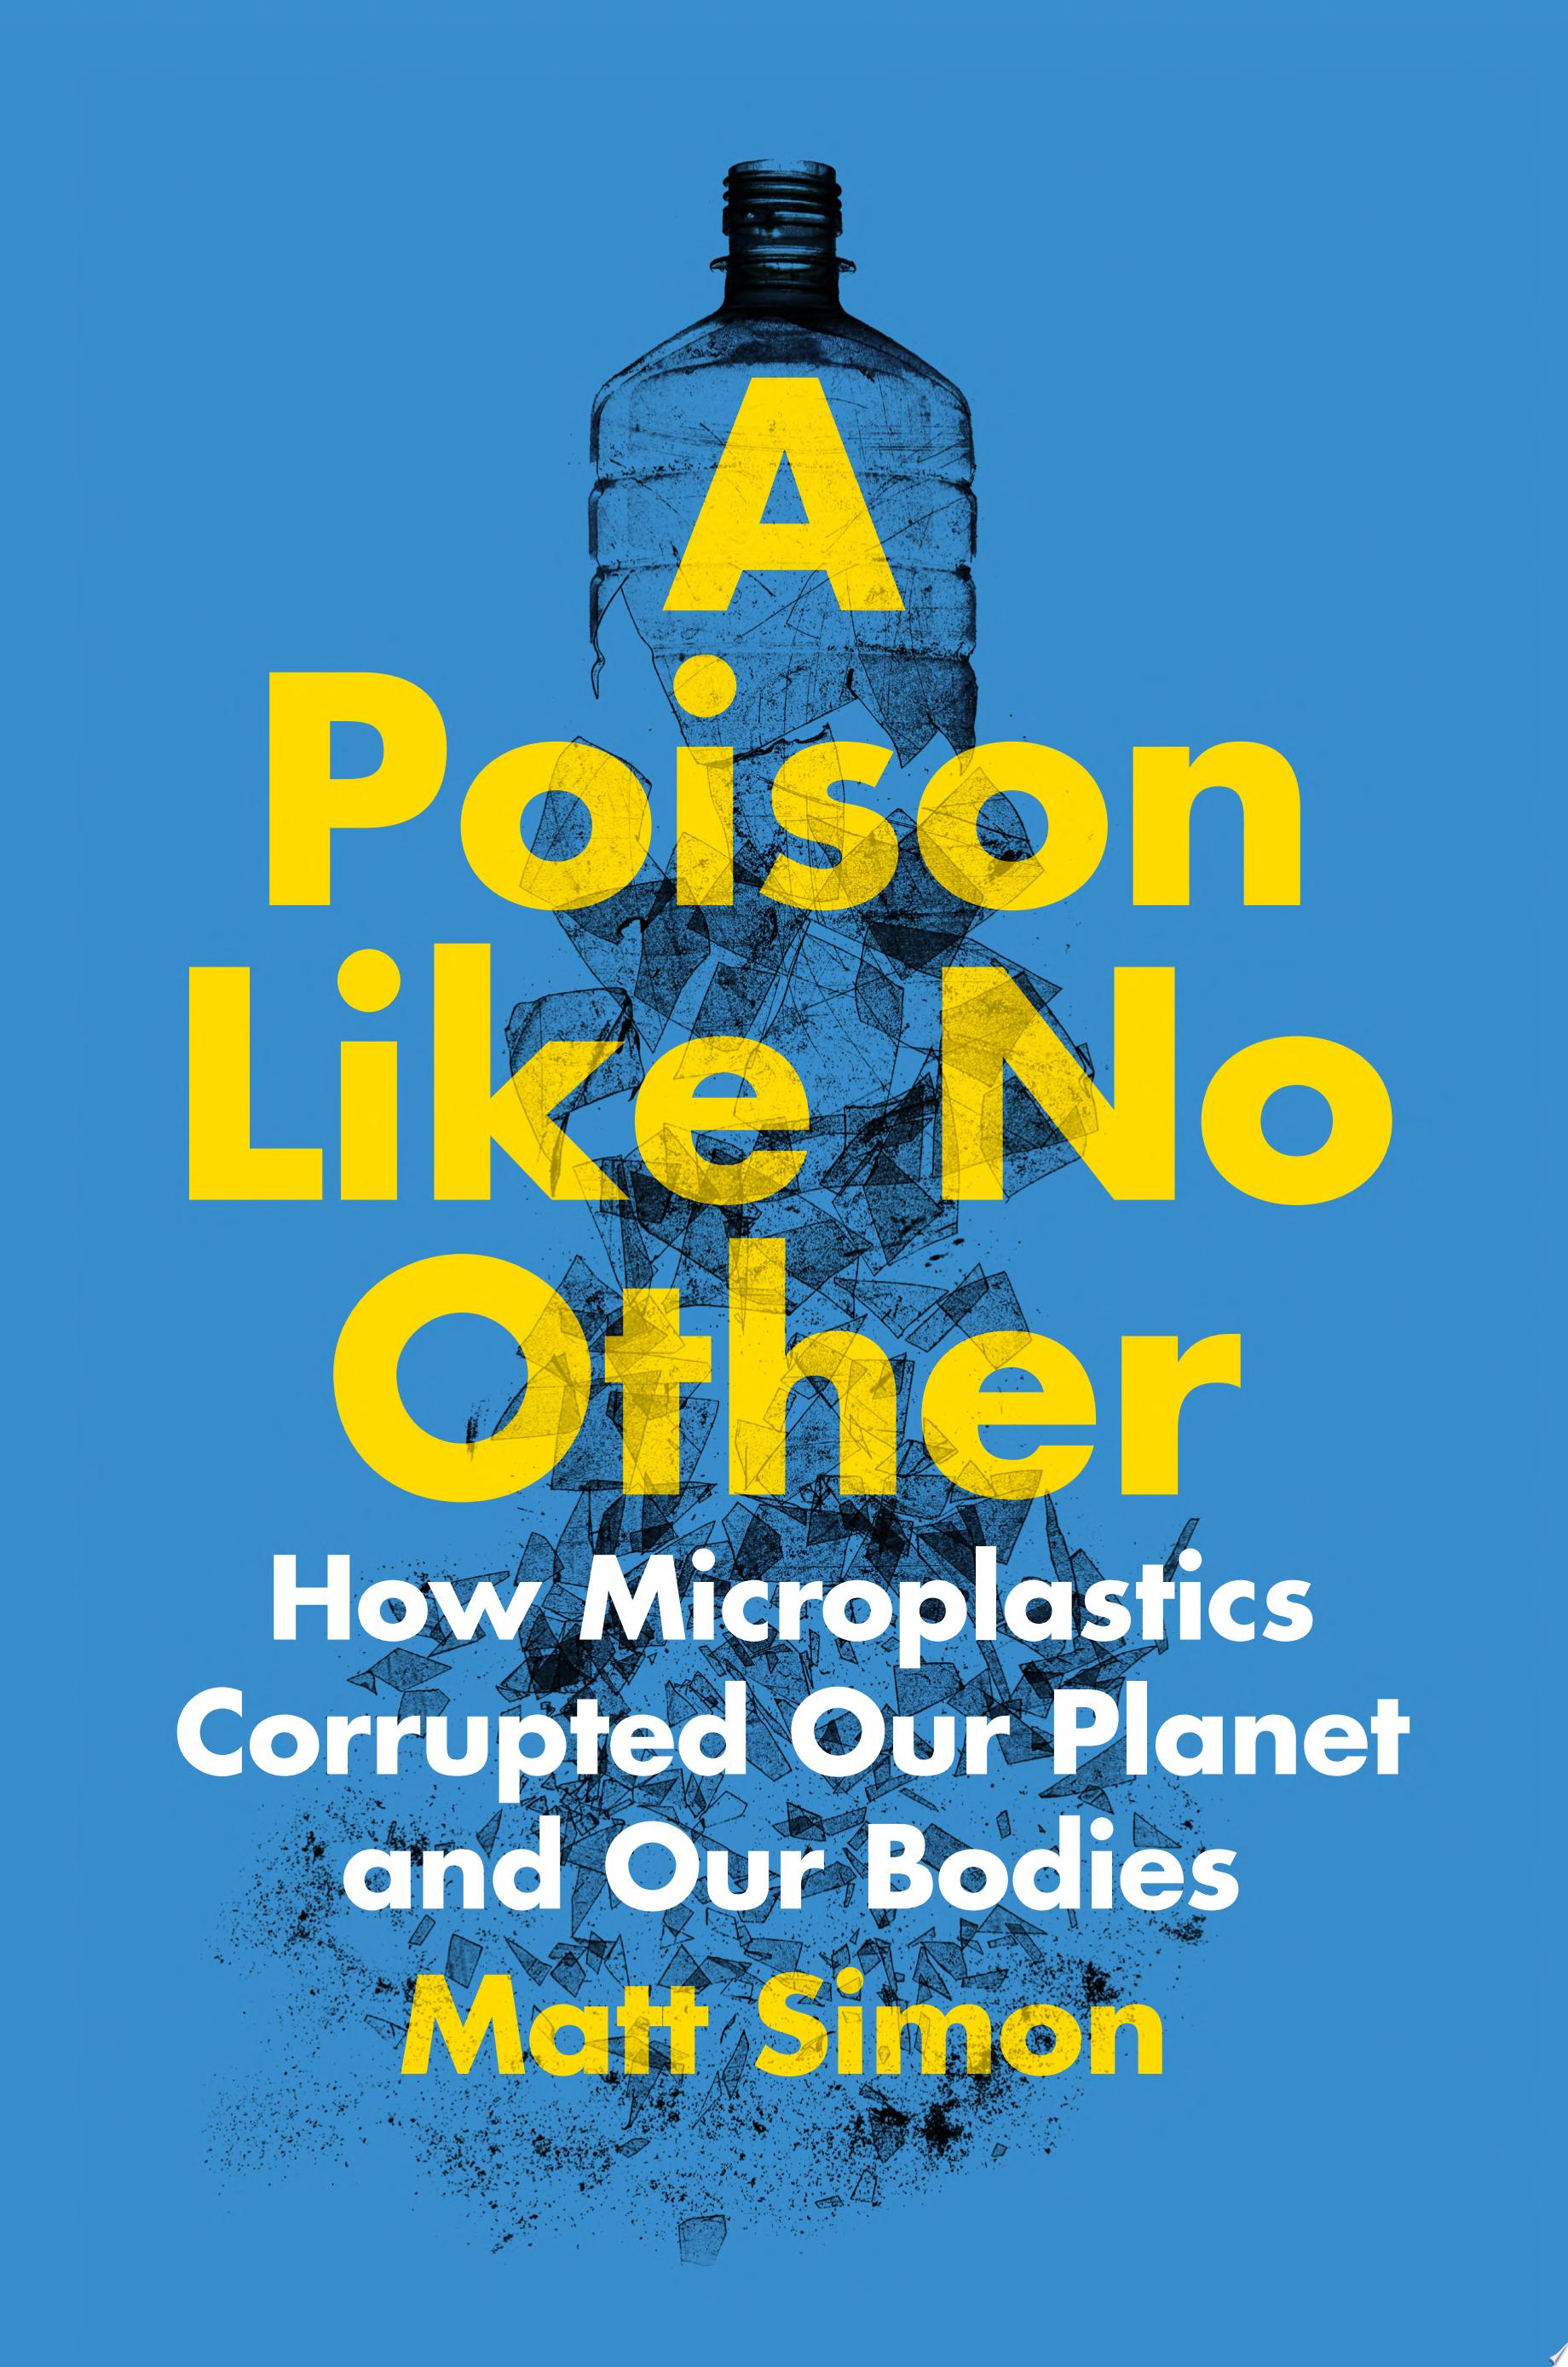 Image for "A Poison Like No Other"